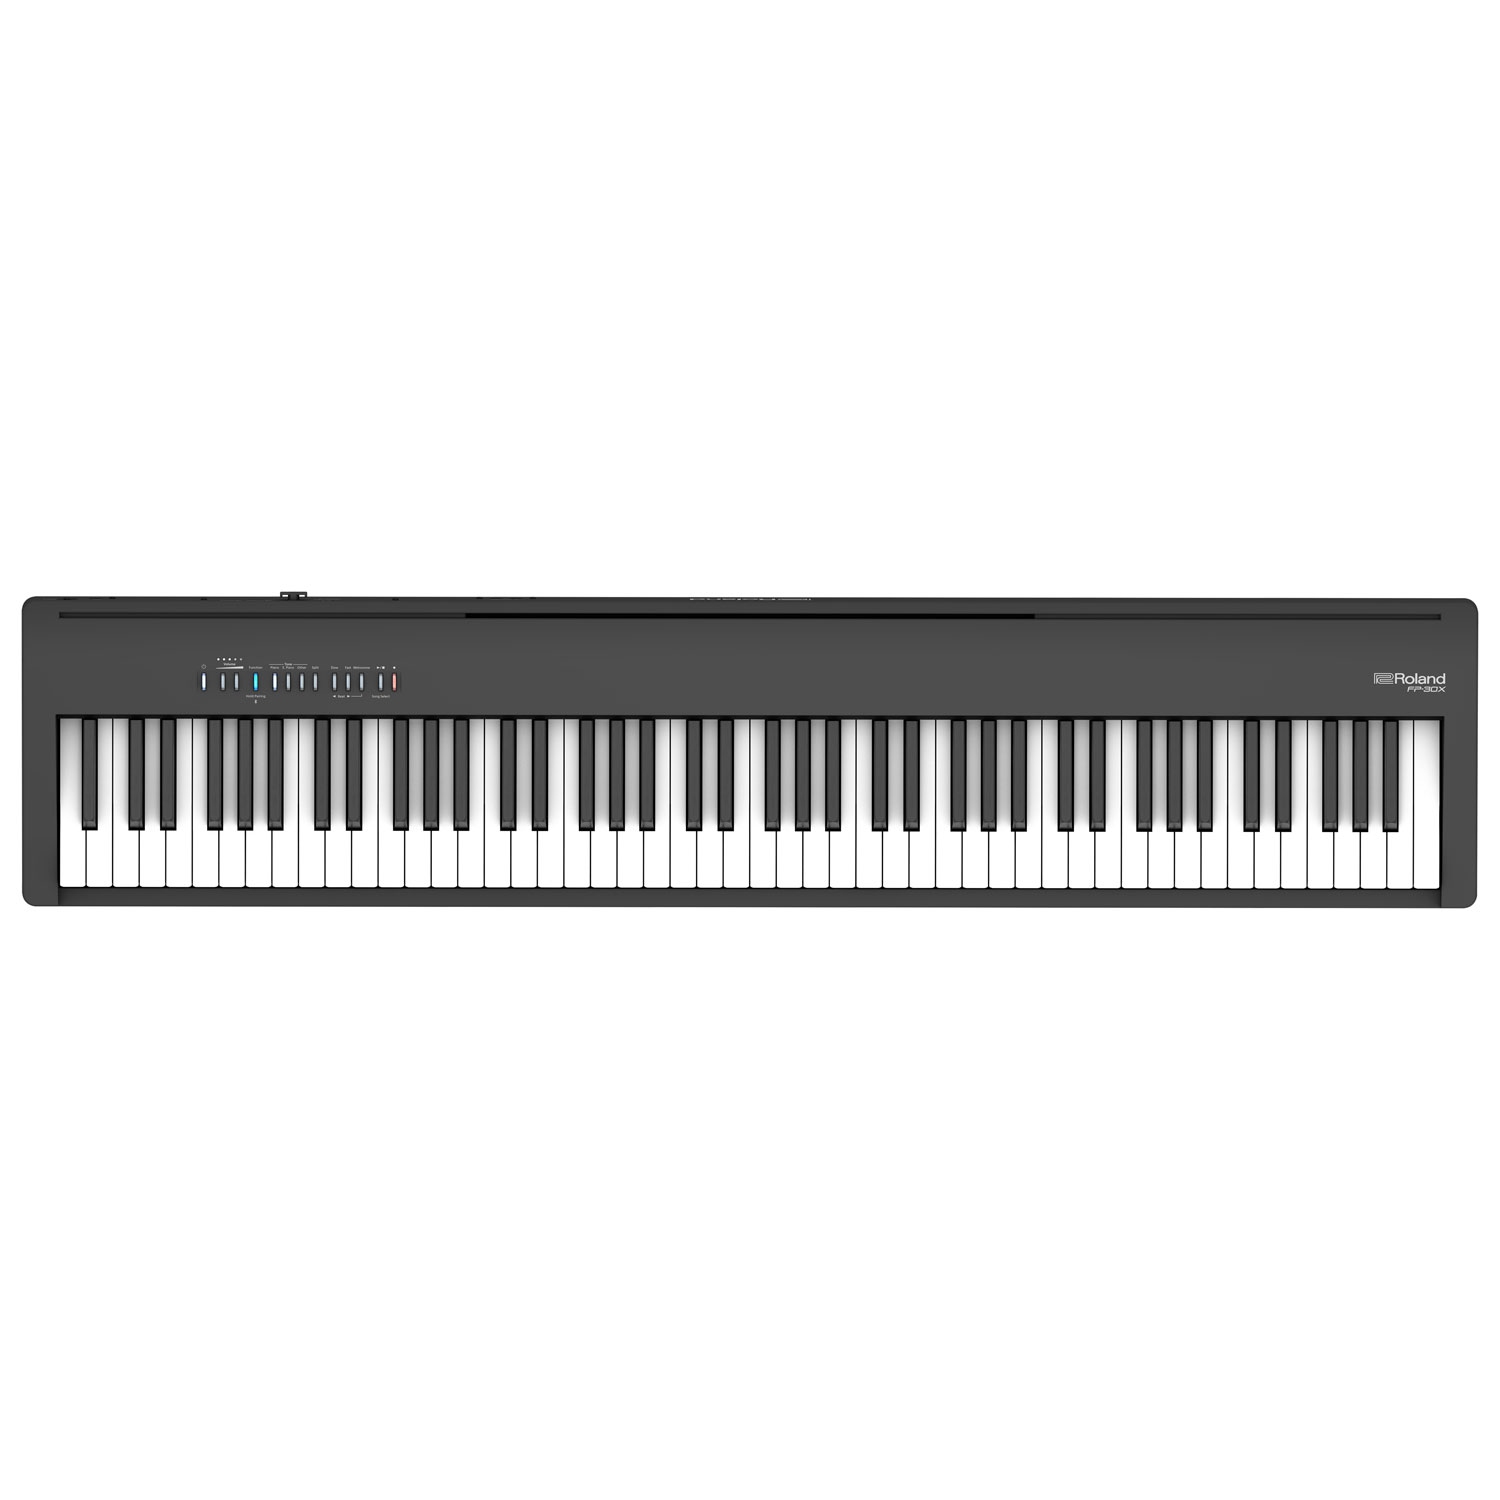 Roland FP-30X Digital Piano with Built-in Powerful Amplifier and Stereo Speakers FP-30X-BK Black Rich Tone and Authentic Ivory 88-Note PHA-4 Keyboard for unrivalled Acoustic Feel and Sound. 